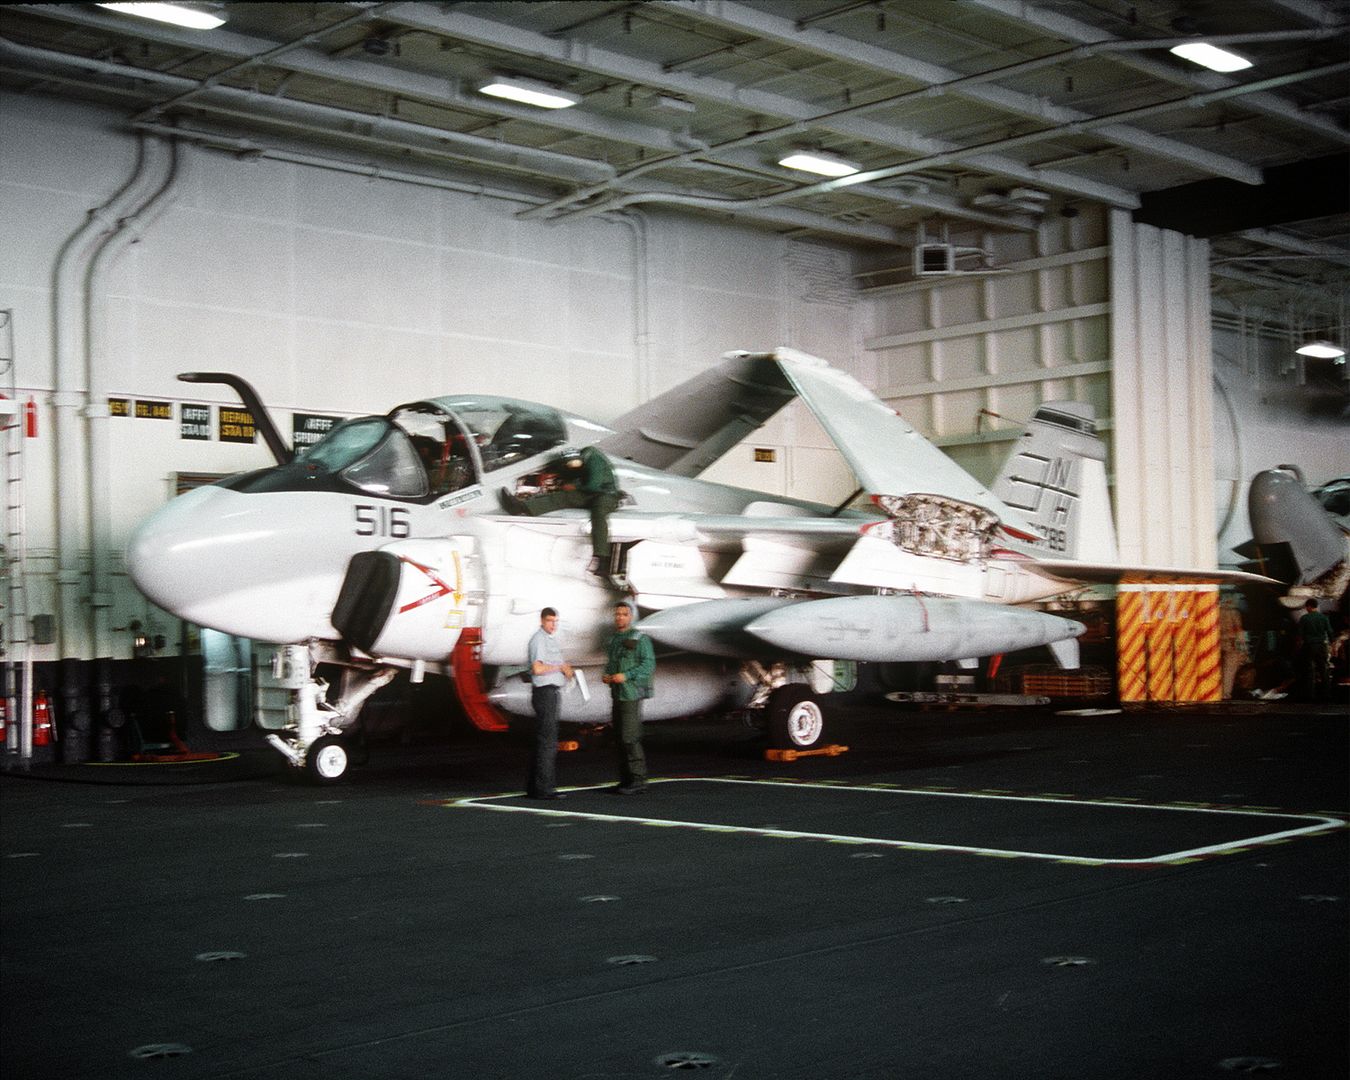 An Attack Squadron 95 KA 6D Intruder Aircraft Is Chocked In The Hangar Bay Aboard The Nuclear Powered Aircraft Carrier USS ABRAHAM LINCOLN